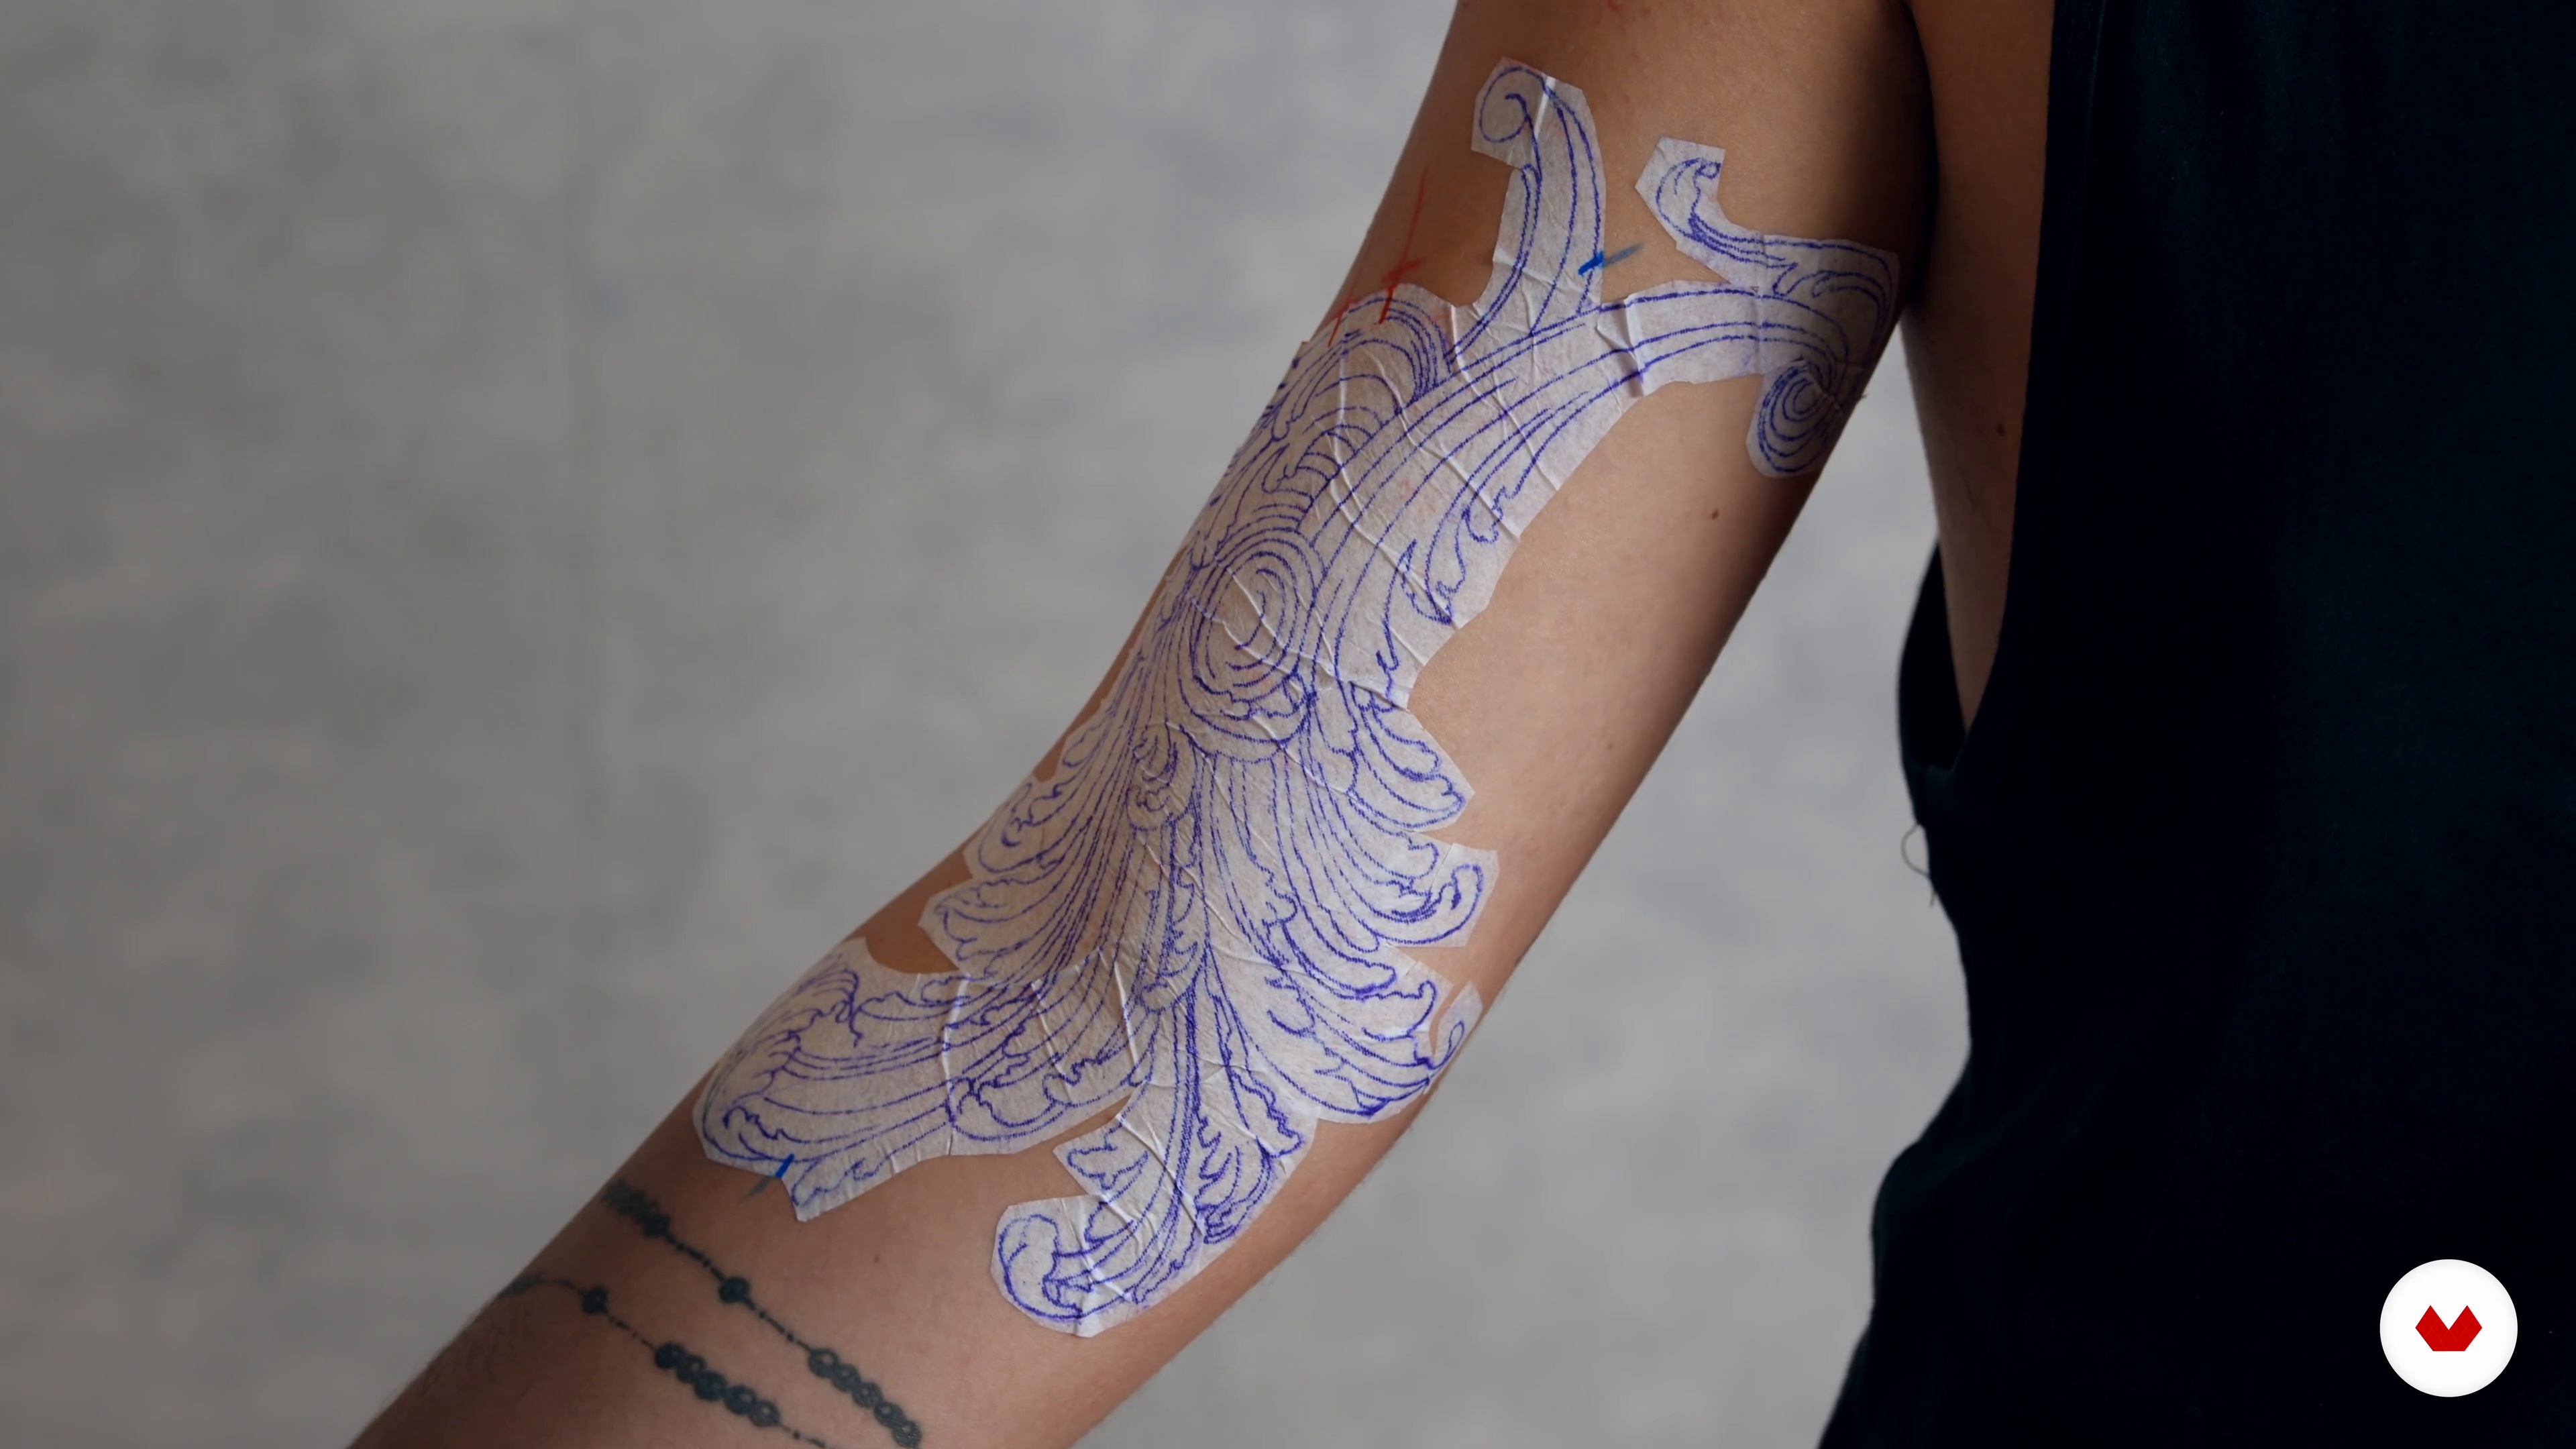 Tattoo Stencil Application Tips and Tricks - wide 11